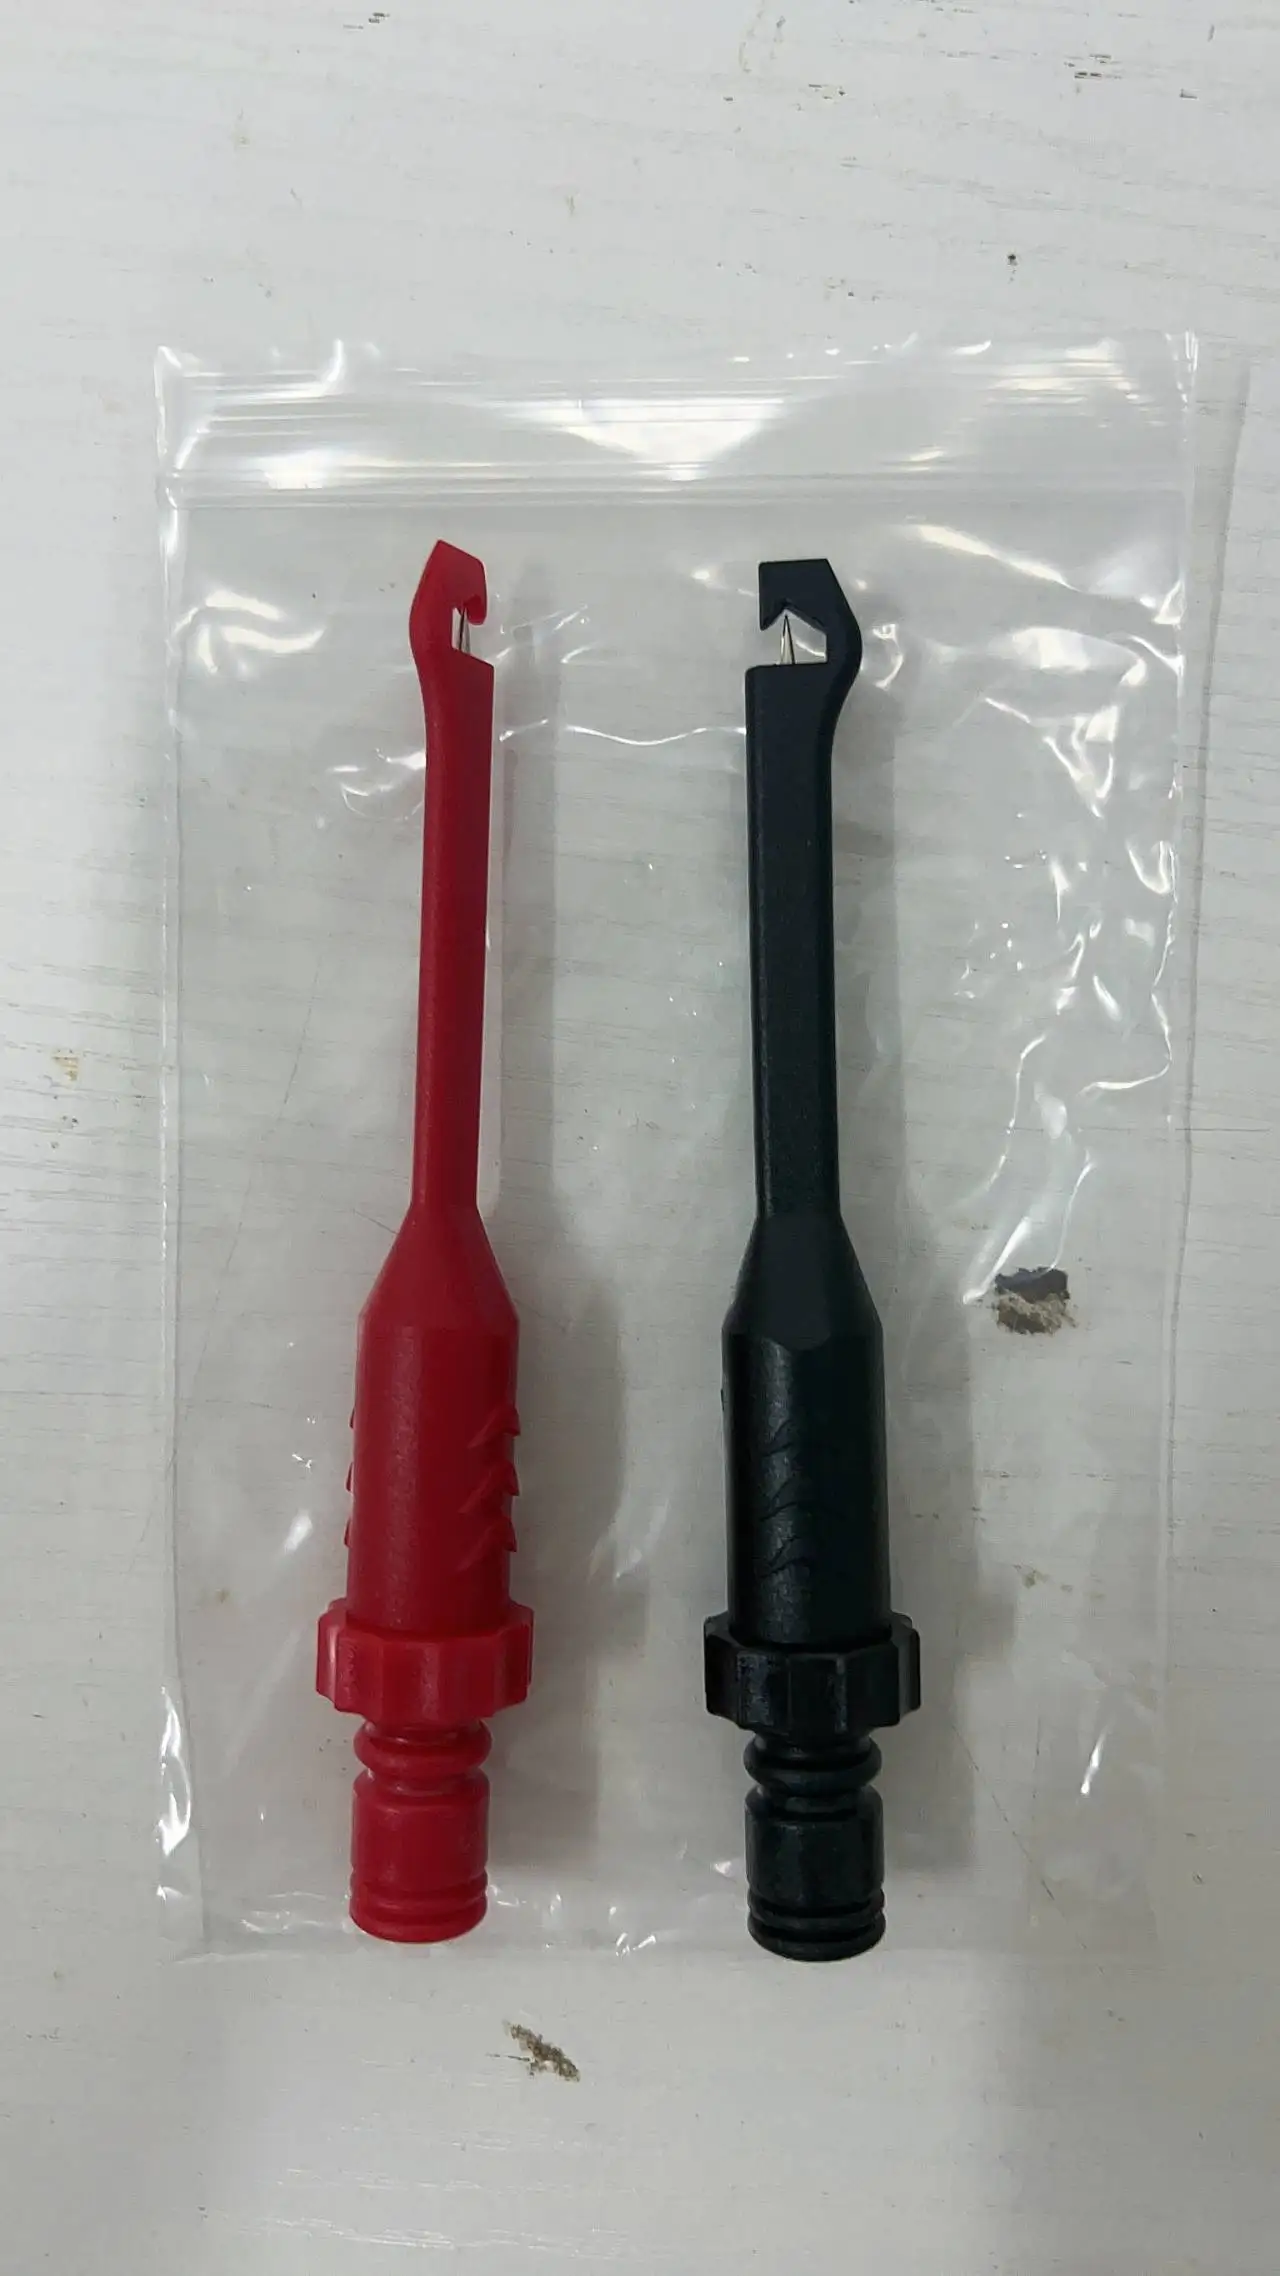 2PCS Insulation Piercing Test Clip MST-08 2pcs/lot New Puncture Damp Tool for sa - £84.80 GBP